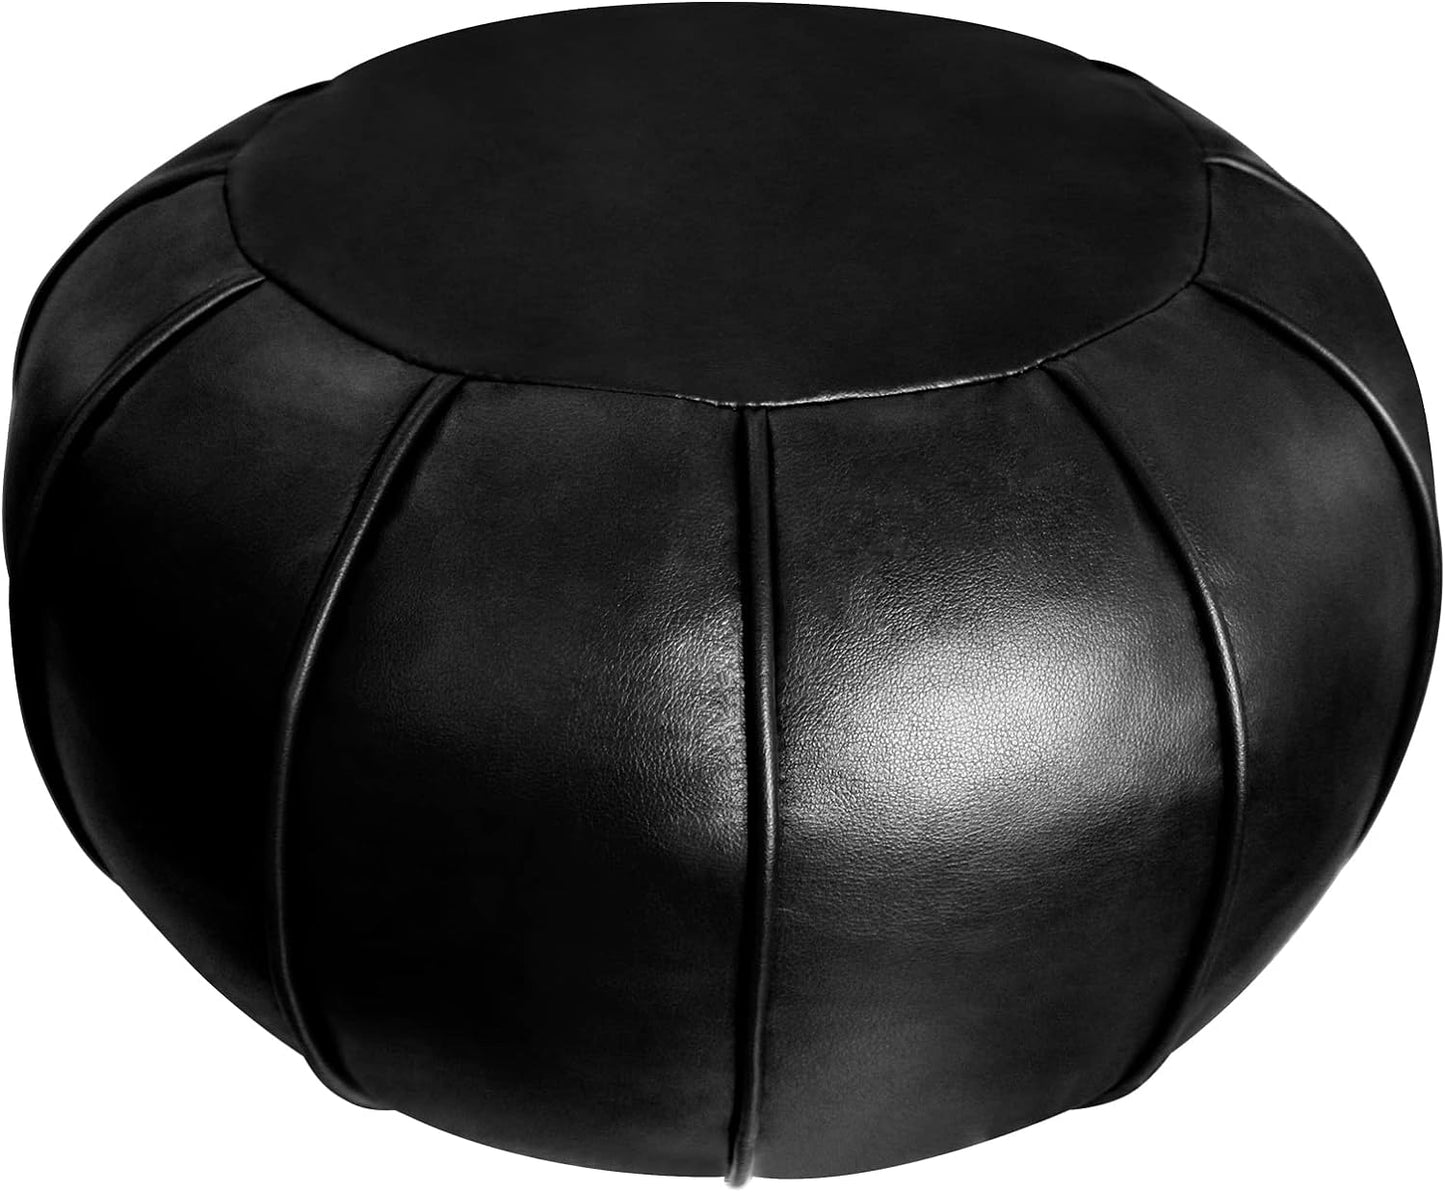 Pouf Ottoman Cover, Pouf Ottoman Foot Rest, Unstuffed Round Faux Leather Moroccan Decor, Storage Solution Footstool, Pouffe Seat for Balcony 21dia Yellow Brown, Poufs for Lving Room Gifts for Women